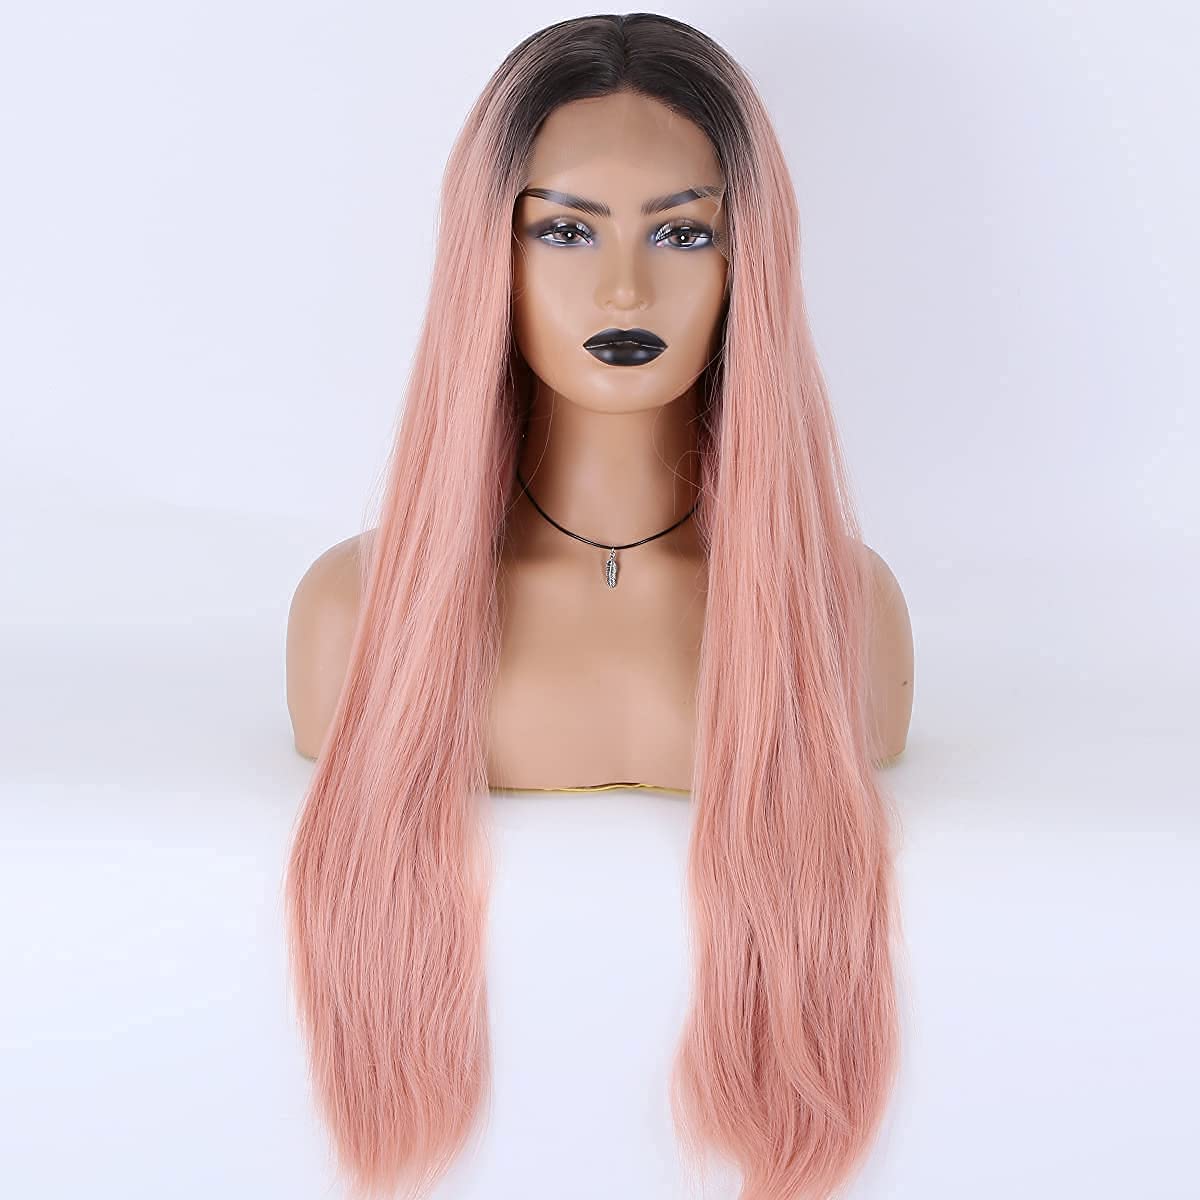 13×4 Long light Pink Straight Wig,Ombre Pink Lace Front Wig,pink black hair,ombre hair color for black hair,ombre pink hair,pink wig,wigs,hot pink hair,pink hair inspiration,pink hair color,light pink hair,rose gold hair,rose gold costume hair,rose pink hair wigs,rose gold hair ombre,pink roots black hair wig,pink roots black hair wig black girl,pink and black hair black wig,Pink hair black,Pink root black hair wig,Black and pink hair black wig,pink hair lace front wig,pink roots on black wig